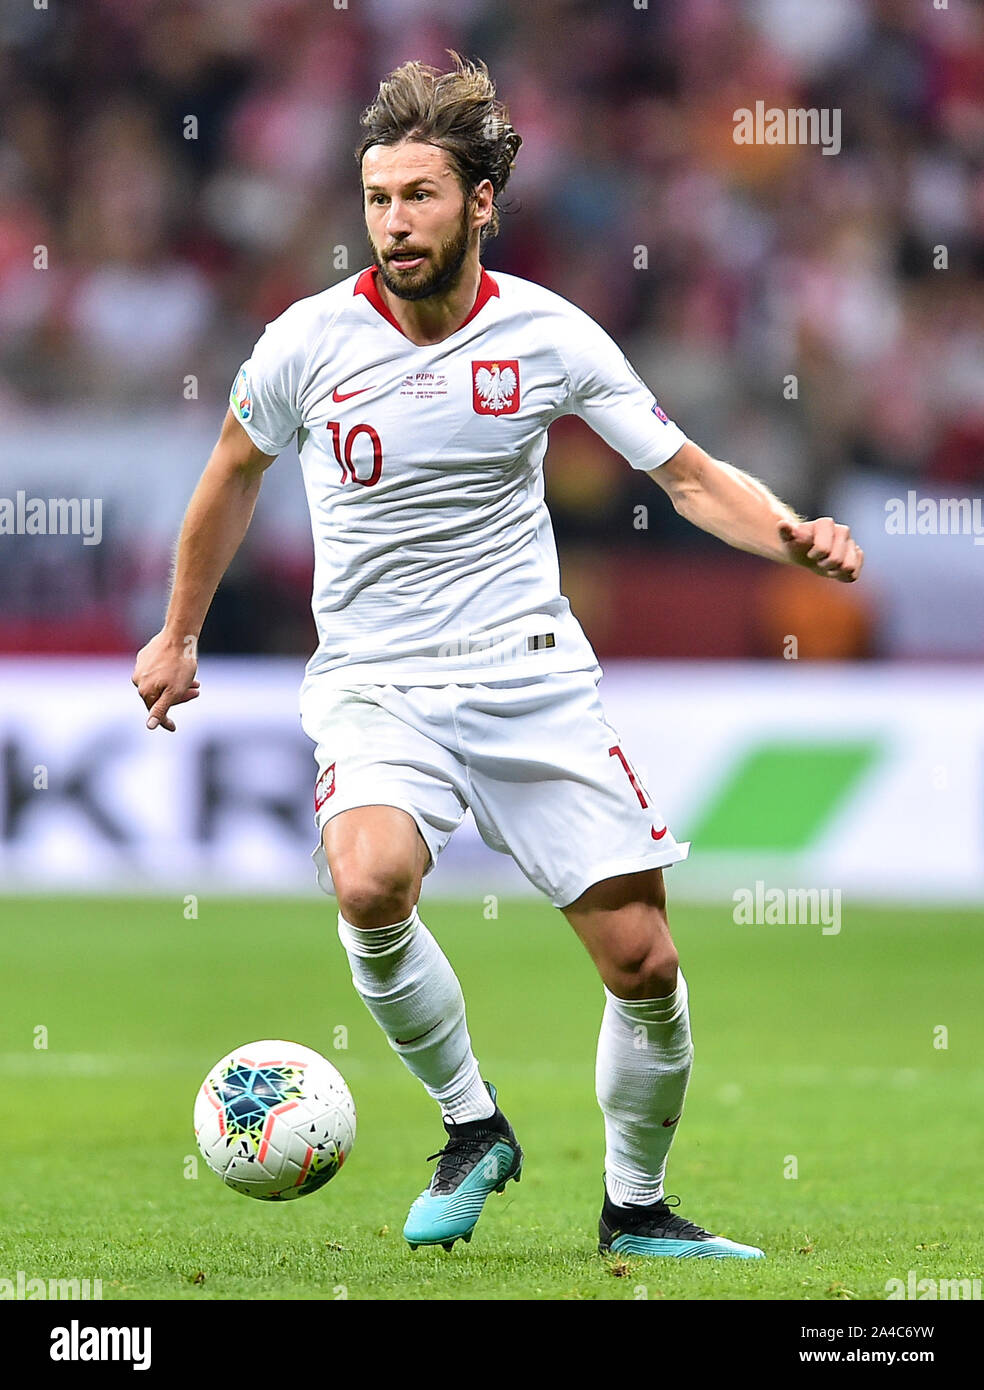 Warsaw, Poland. 13th Oct, 2019. Grzegorz Krychowiak of Poland competes during the UEFA Euro 2020 qualifier Group G match between Poland and North Macedonia in Warsaw, Poland, Oct. 13, 2019. Credit: Rafal Rusek/Xinhua/Alamy Live News Stock Photo